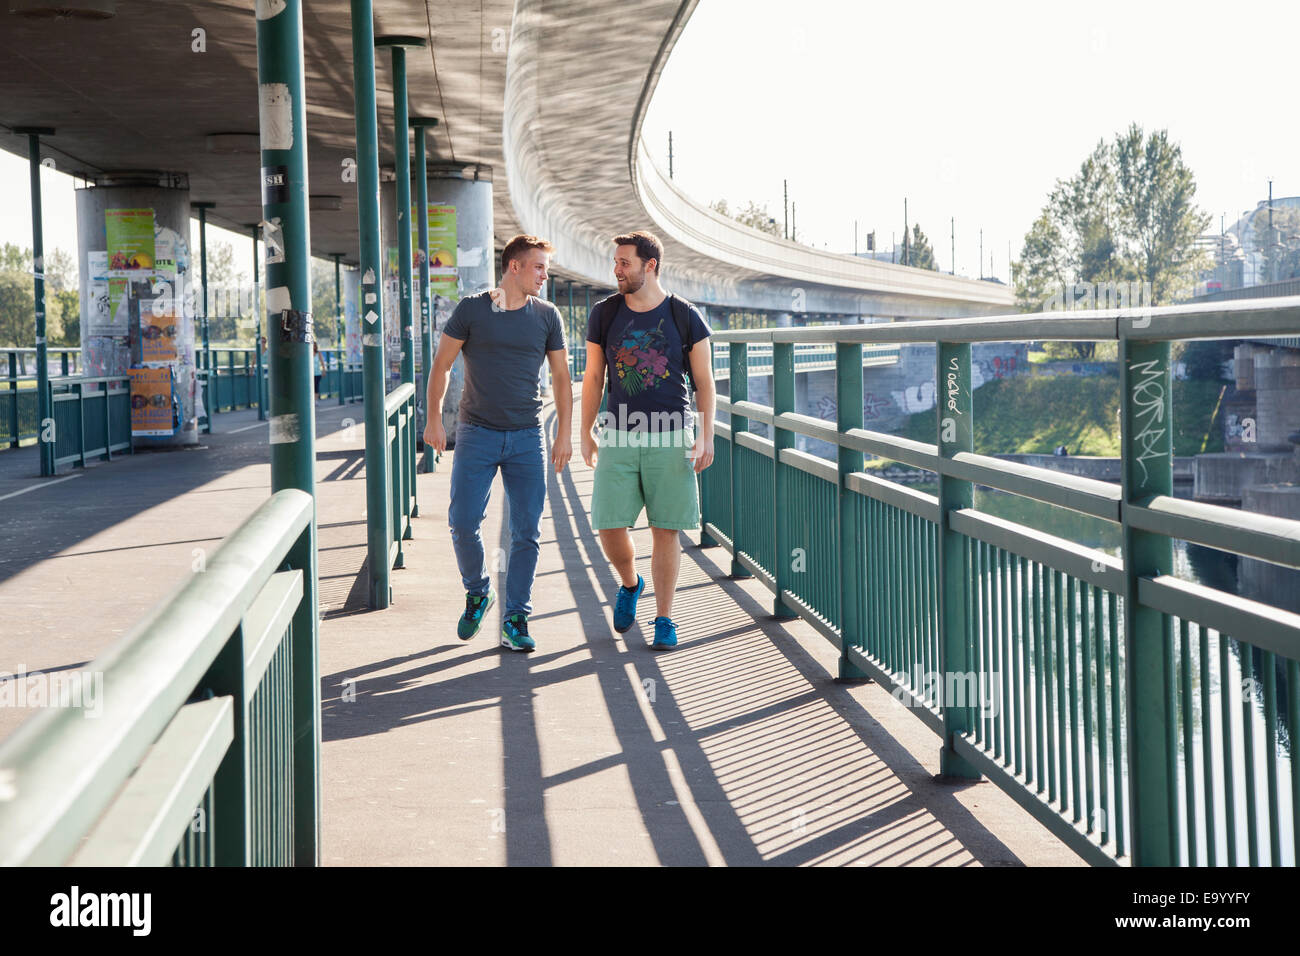 Two young men chatting as they walk over bridge Stock Photo